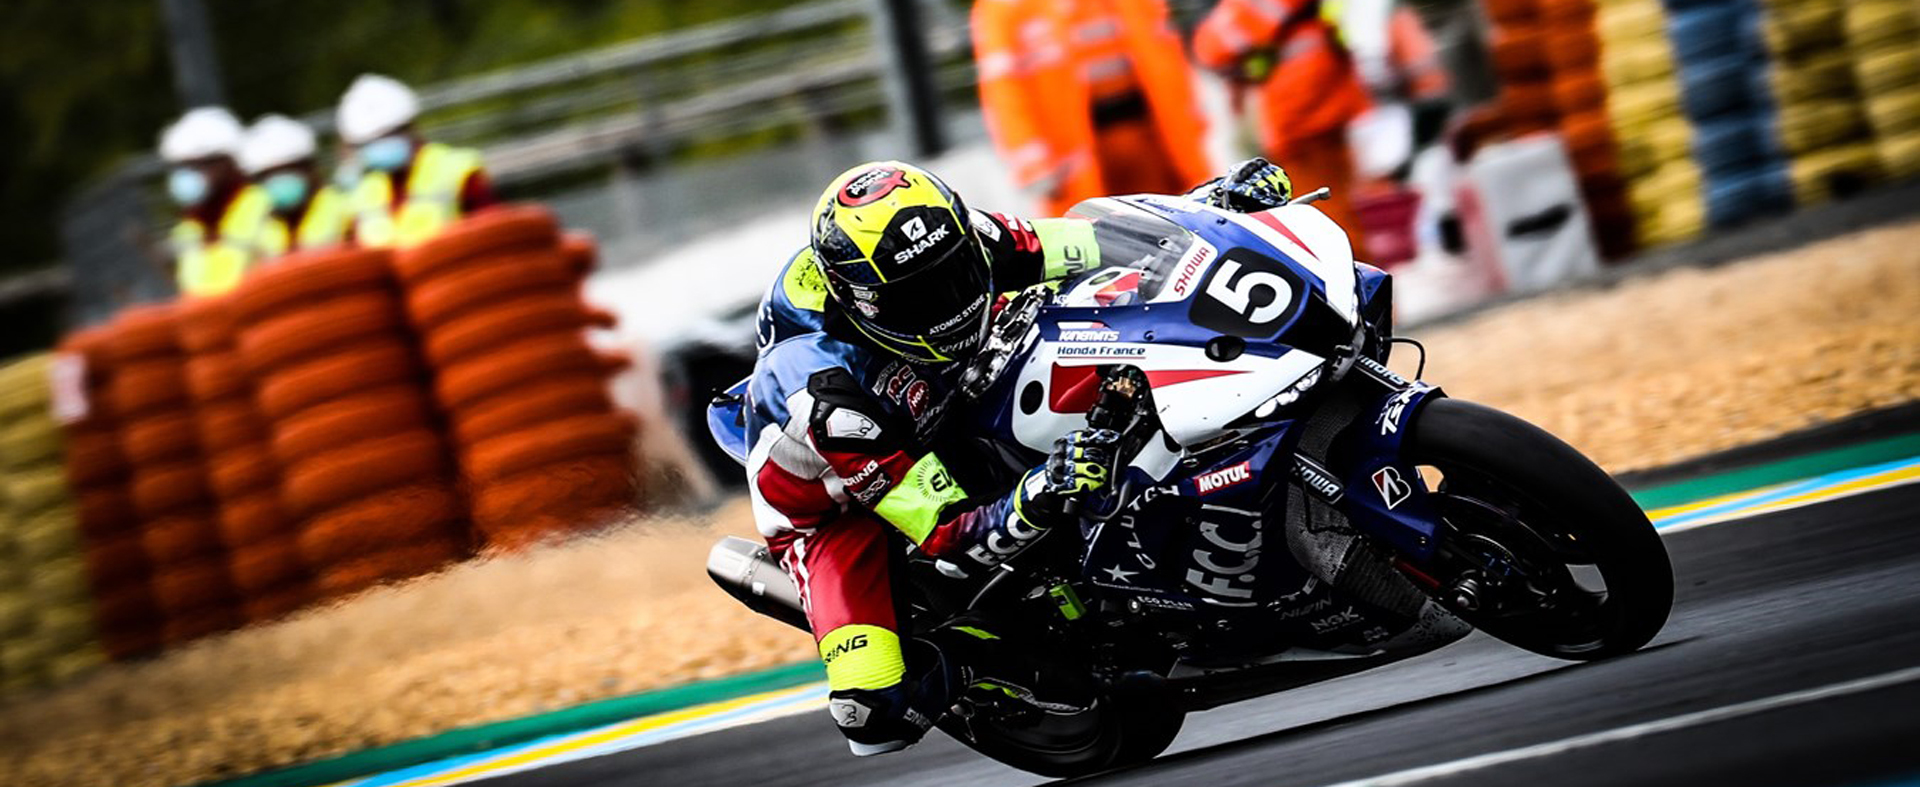 Debut EWC Win For The All­New Fireblade At Le Mans